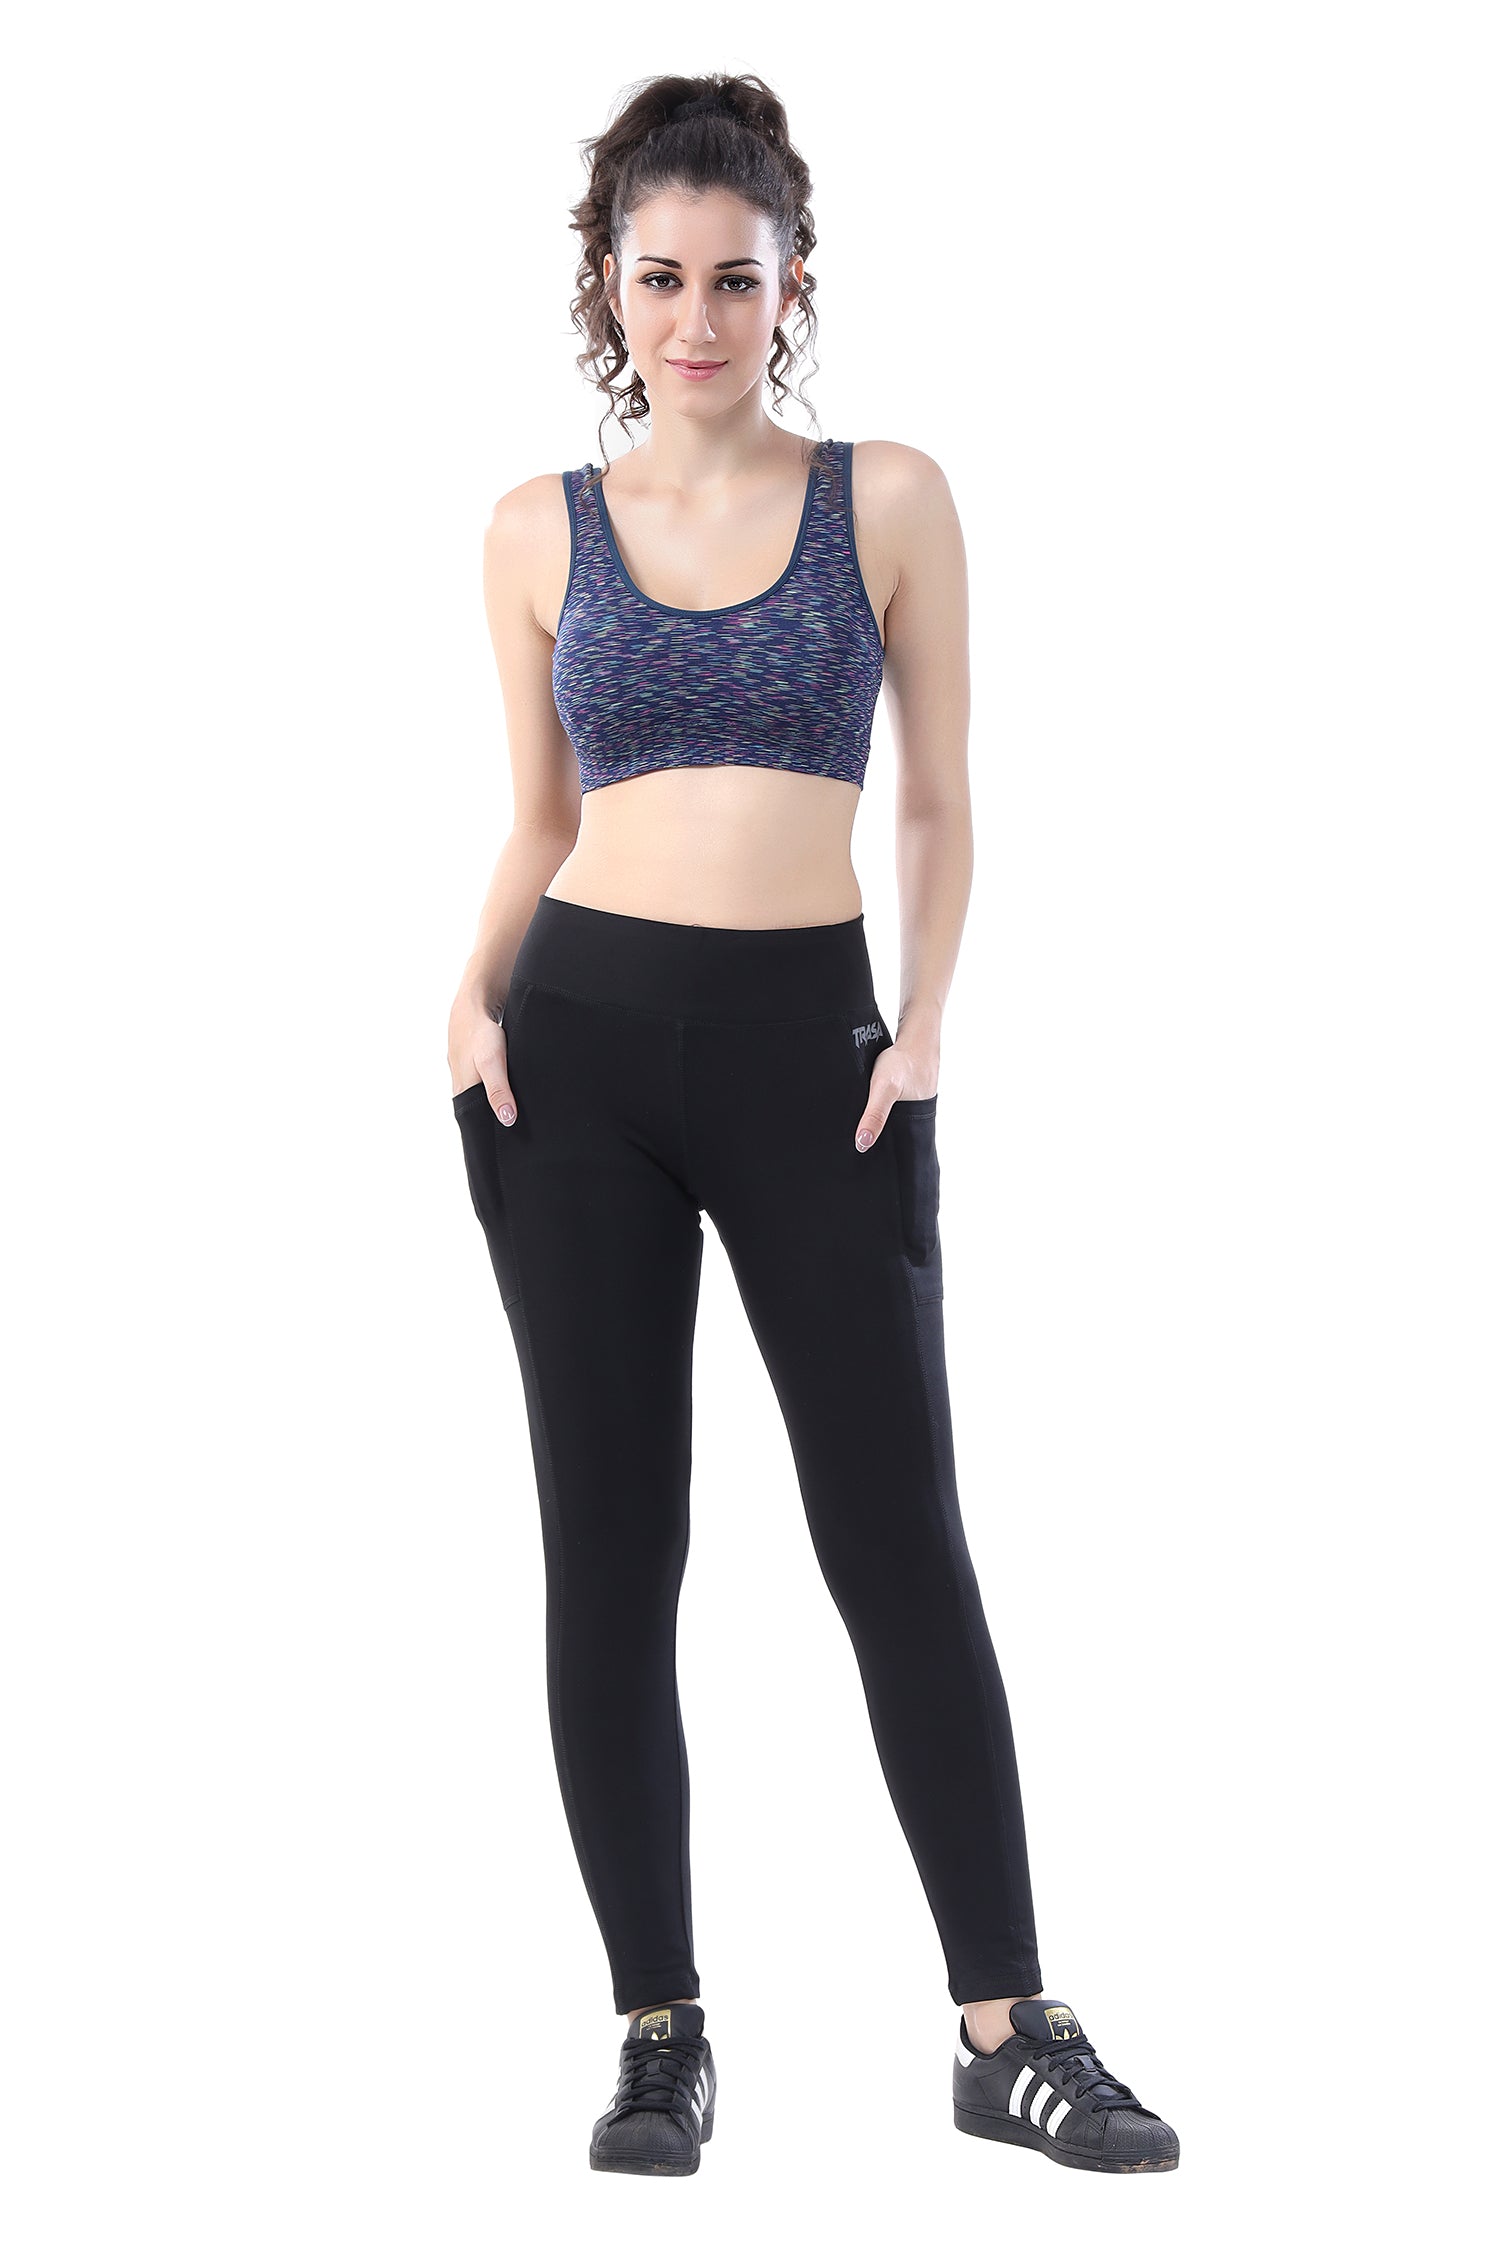 TRASA Active Yoga Pants for Women's Gym High Waist with 3 Pockets- Black